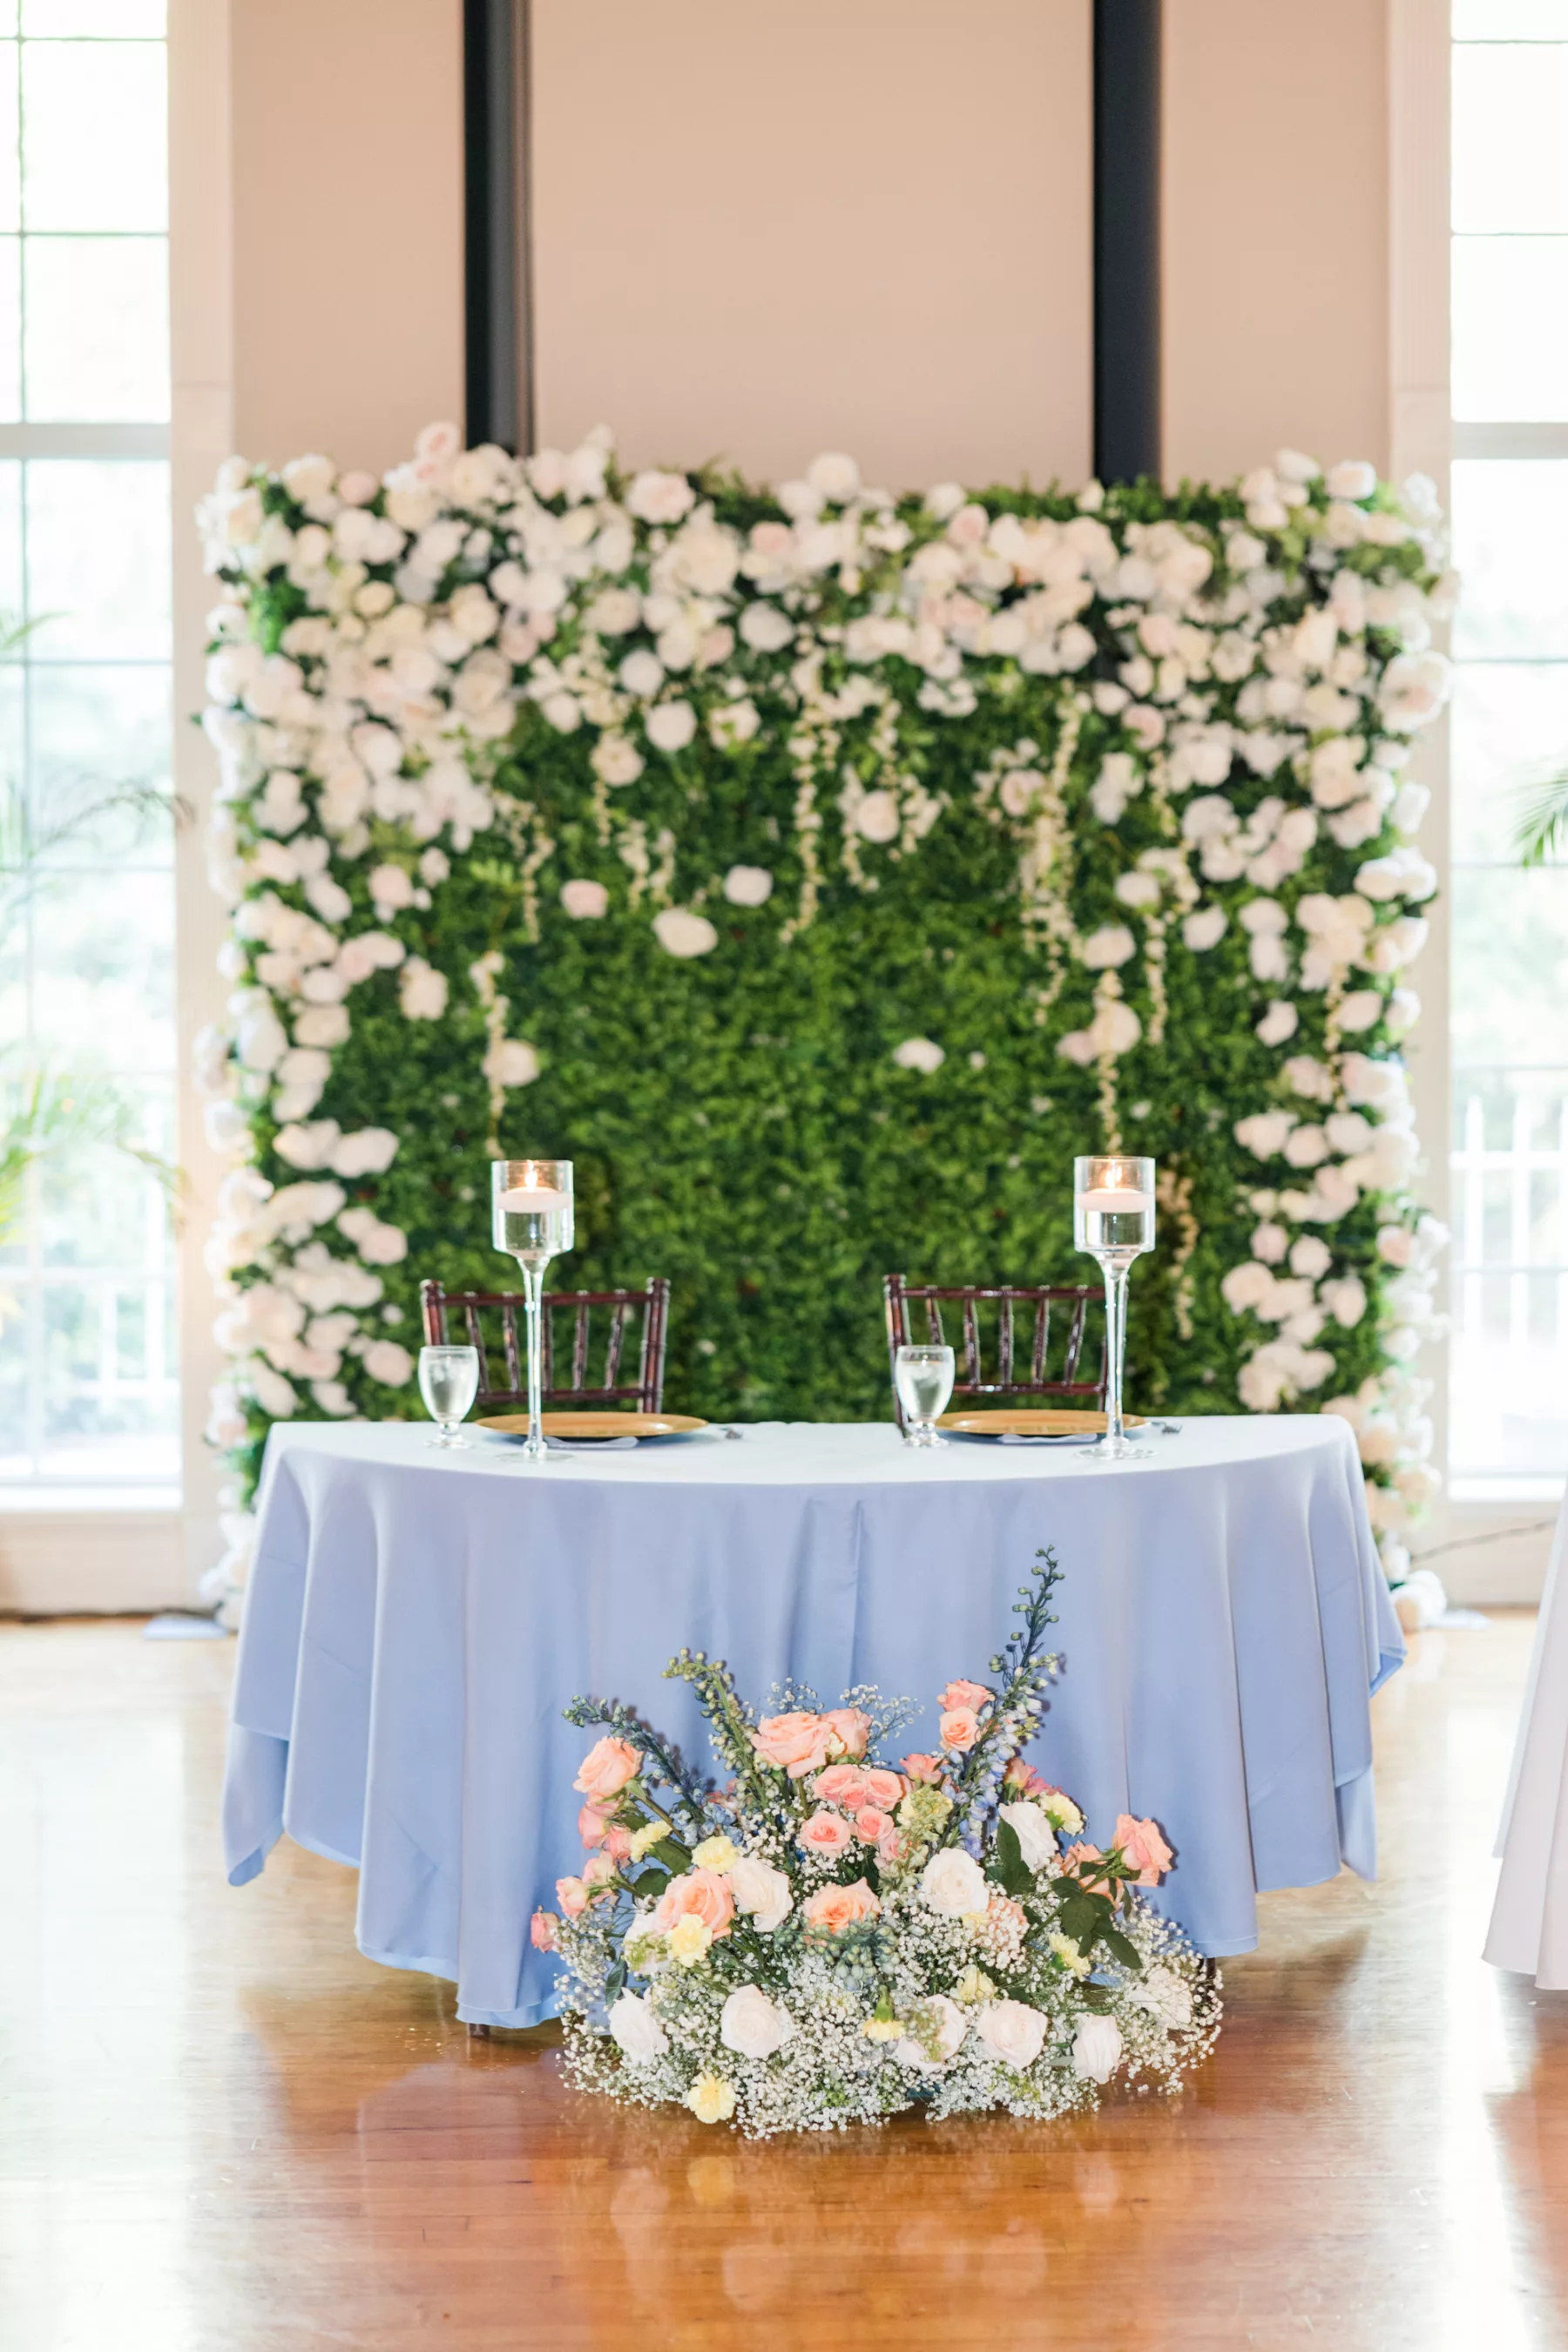 Blue and Peach English Garden Inspired Wedding Reception Sweetheart Table Decor Ideas | Peach Roses, Yellow Carnations, Baby's Breath, Blue Snapdragon Floor Flower Arrangement Inspiration